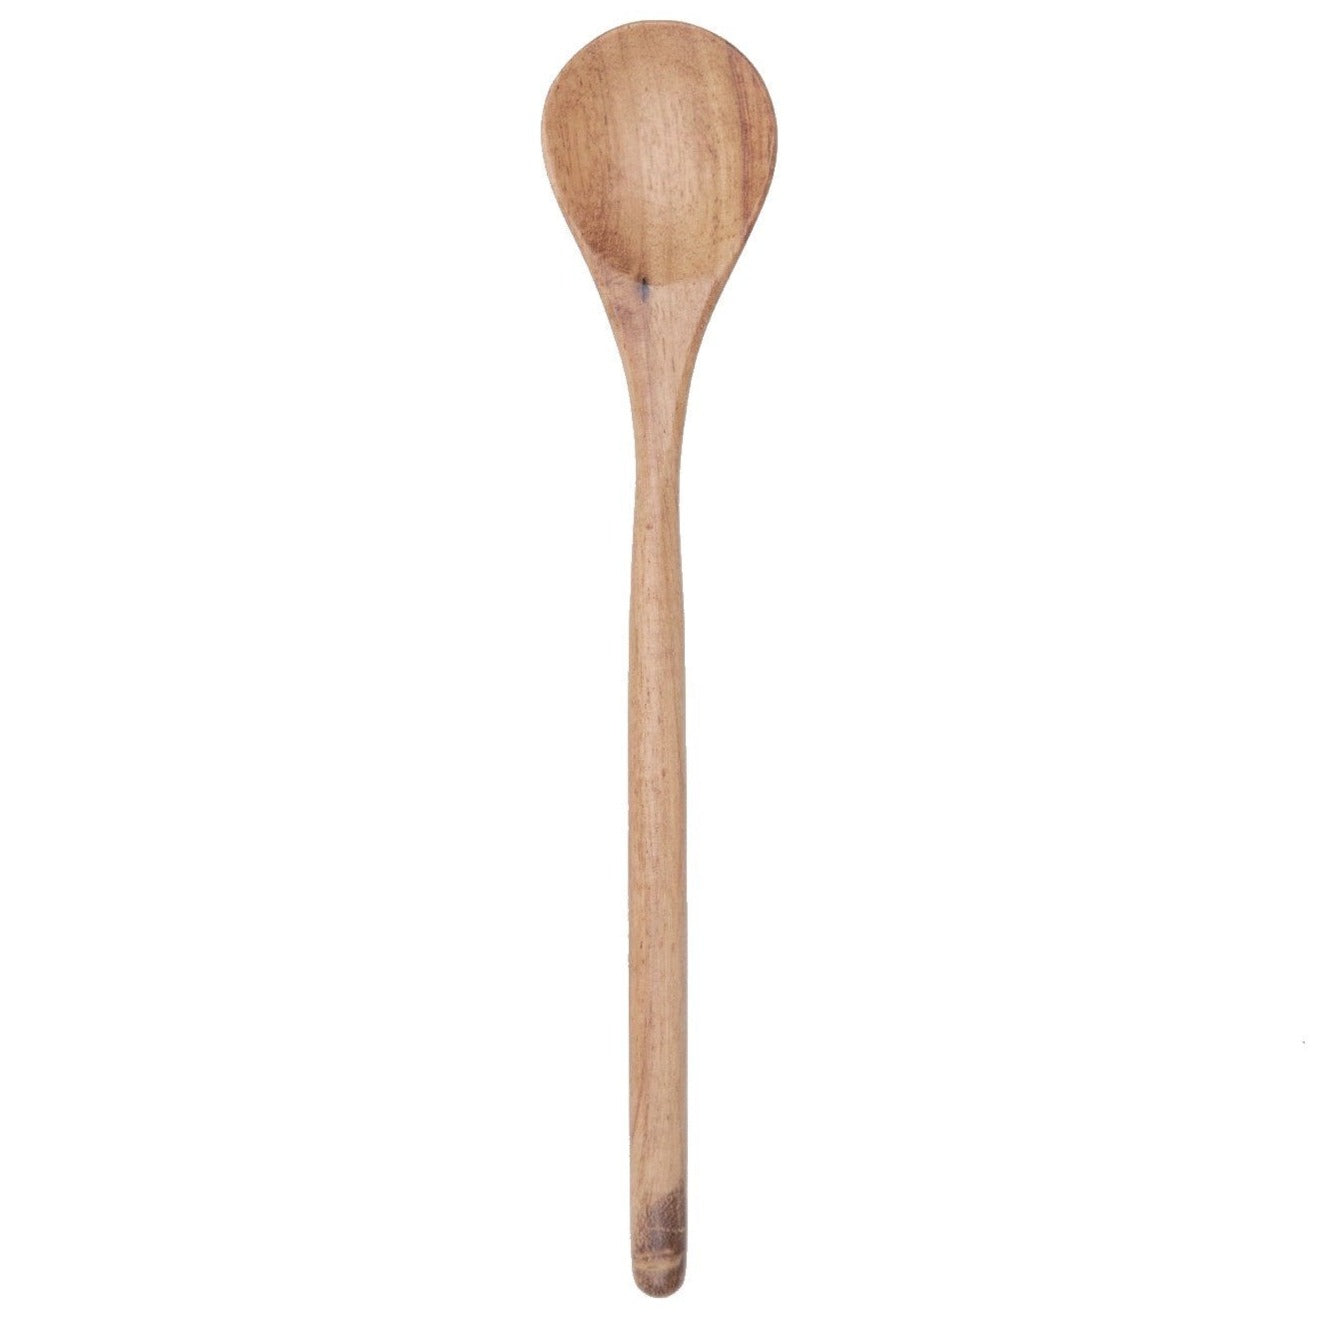 Hand Carved Wood Stirring Spoon - Handmade, Sustainable and Fair trade